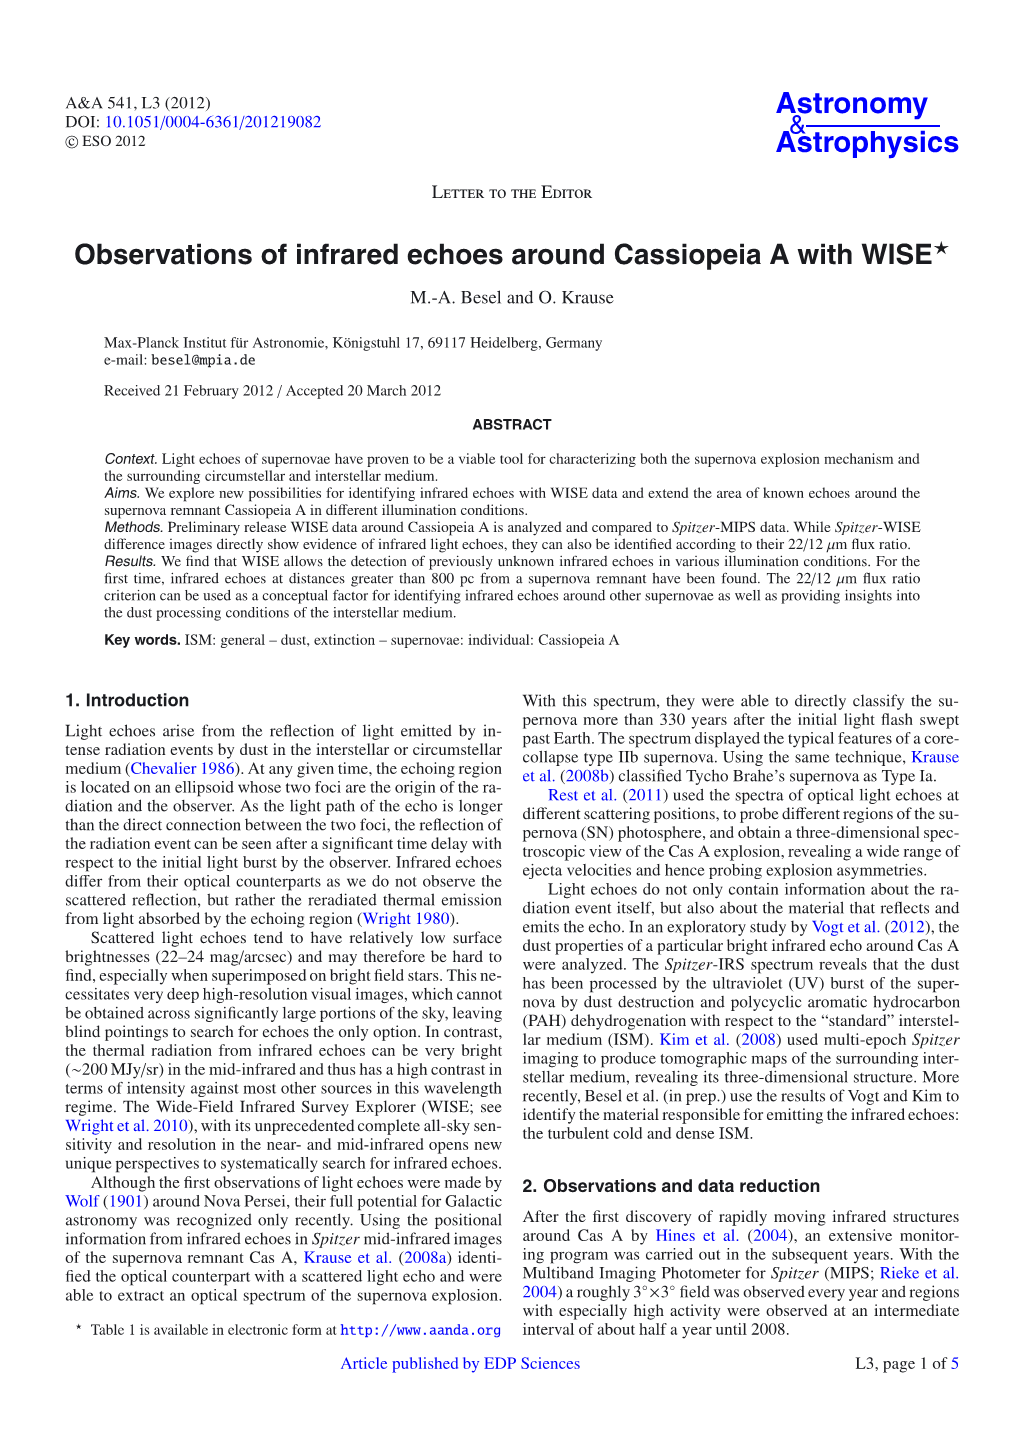 Observations of Infrared Echoes Around Cassiopeia a with WISE⋆